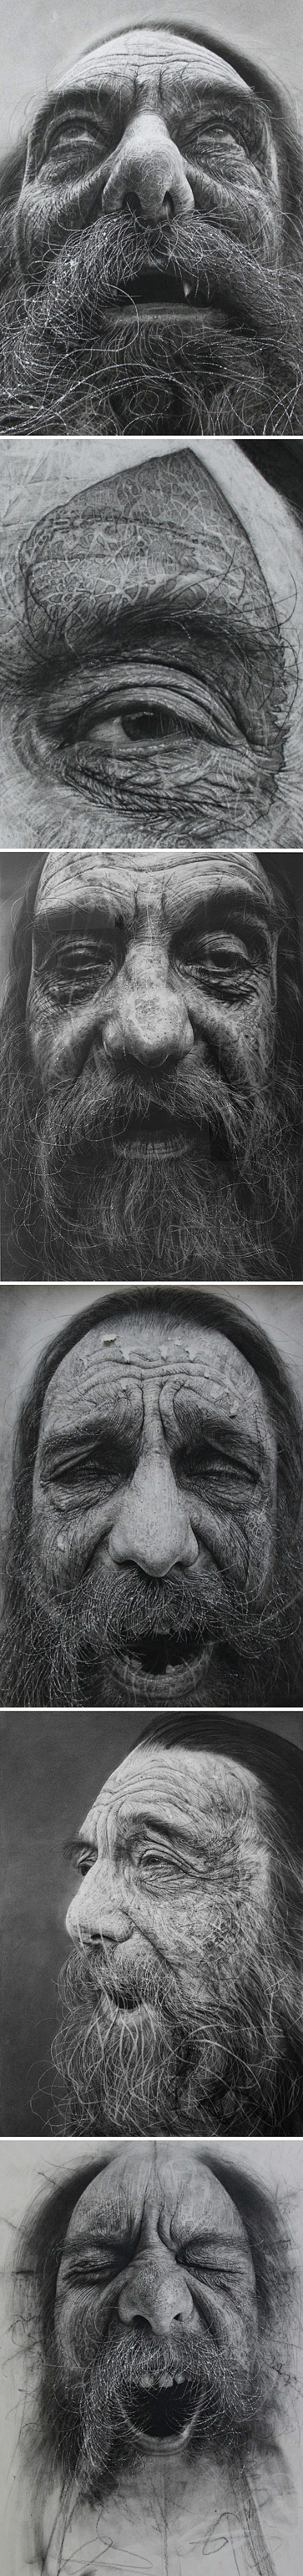 Charcoal drawings by...